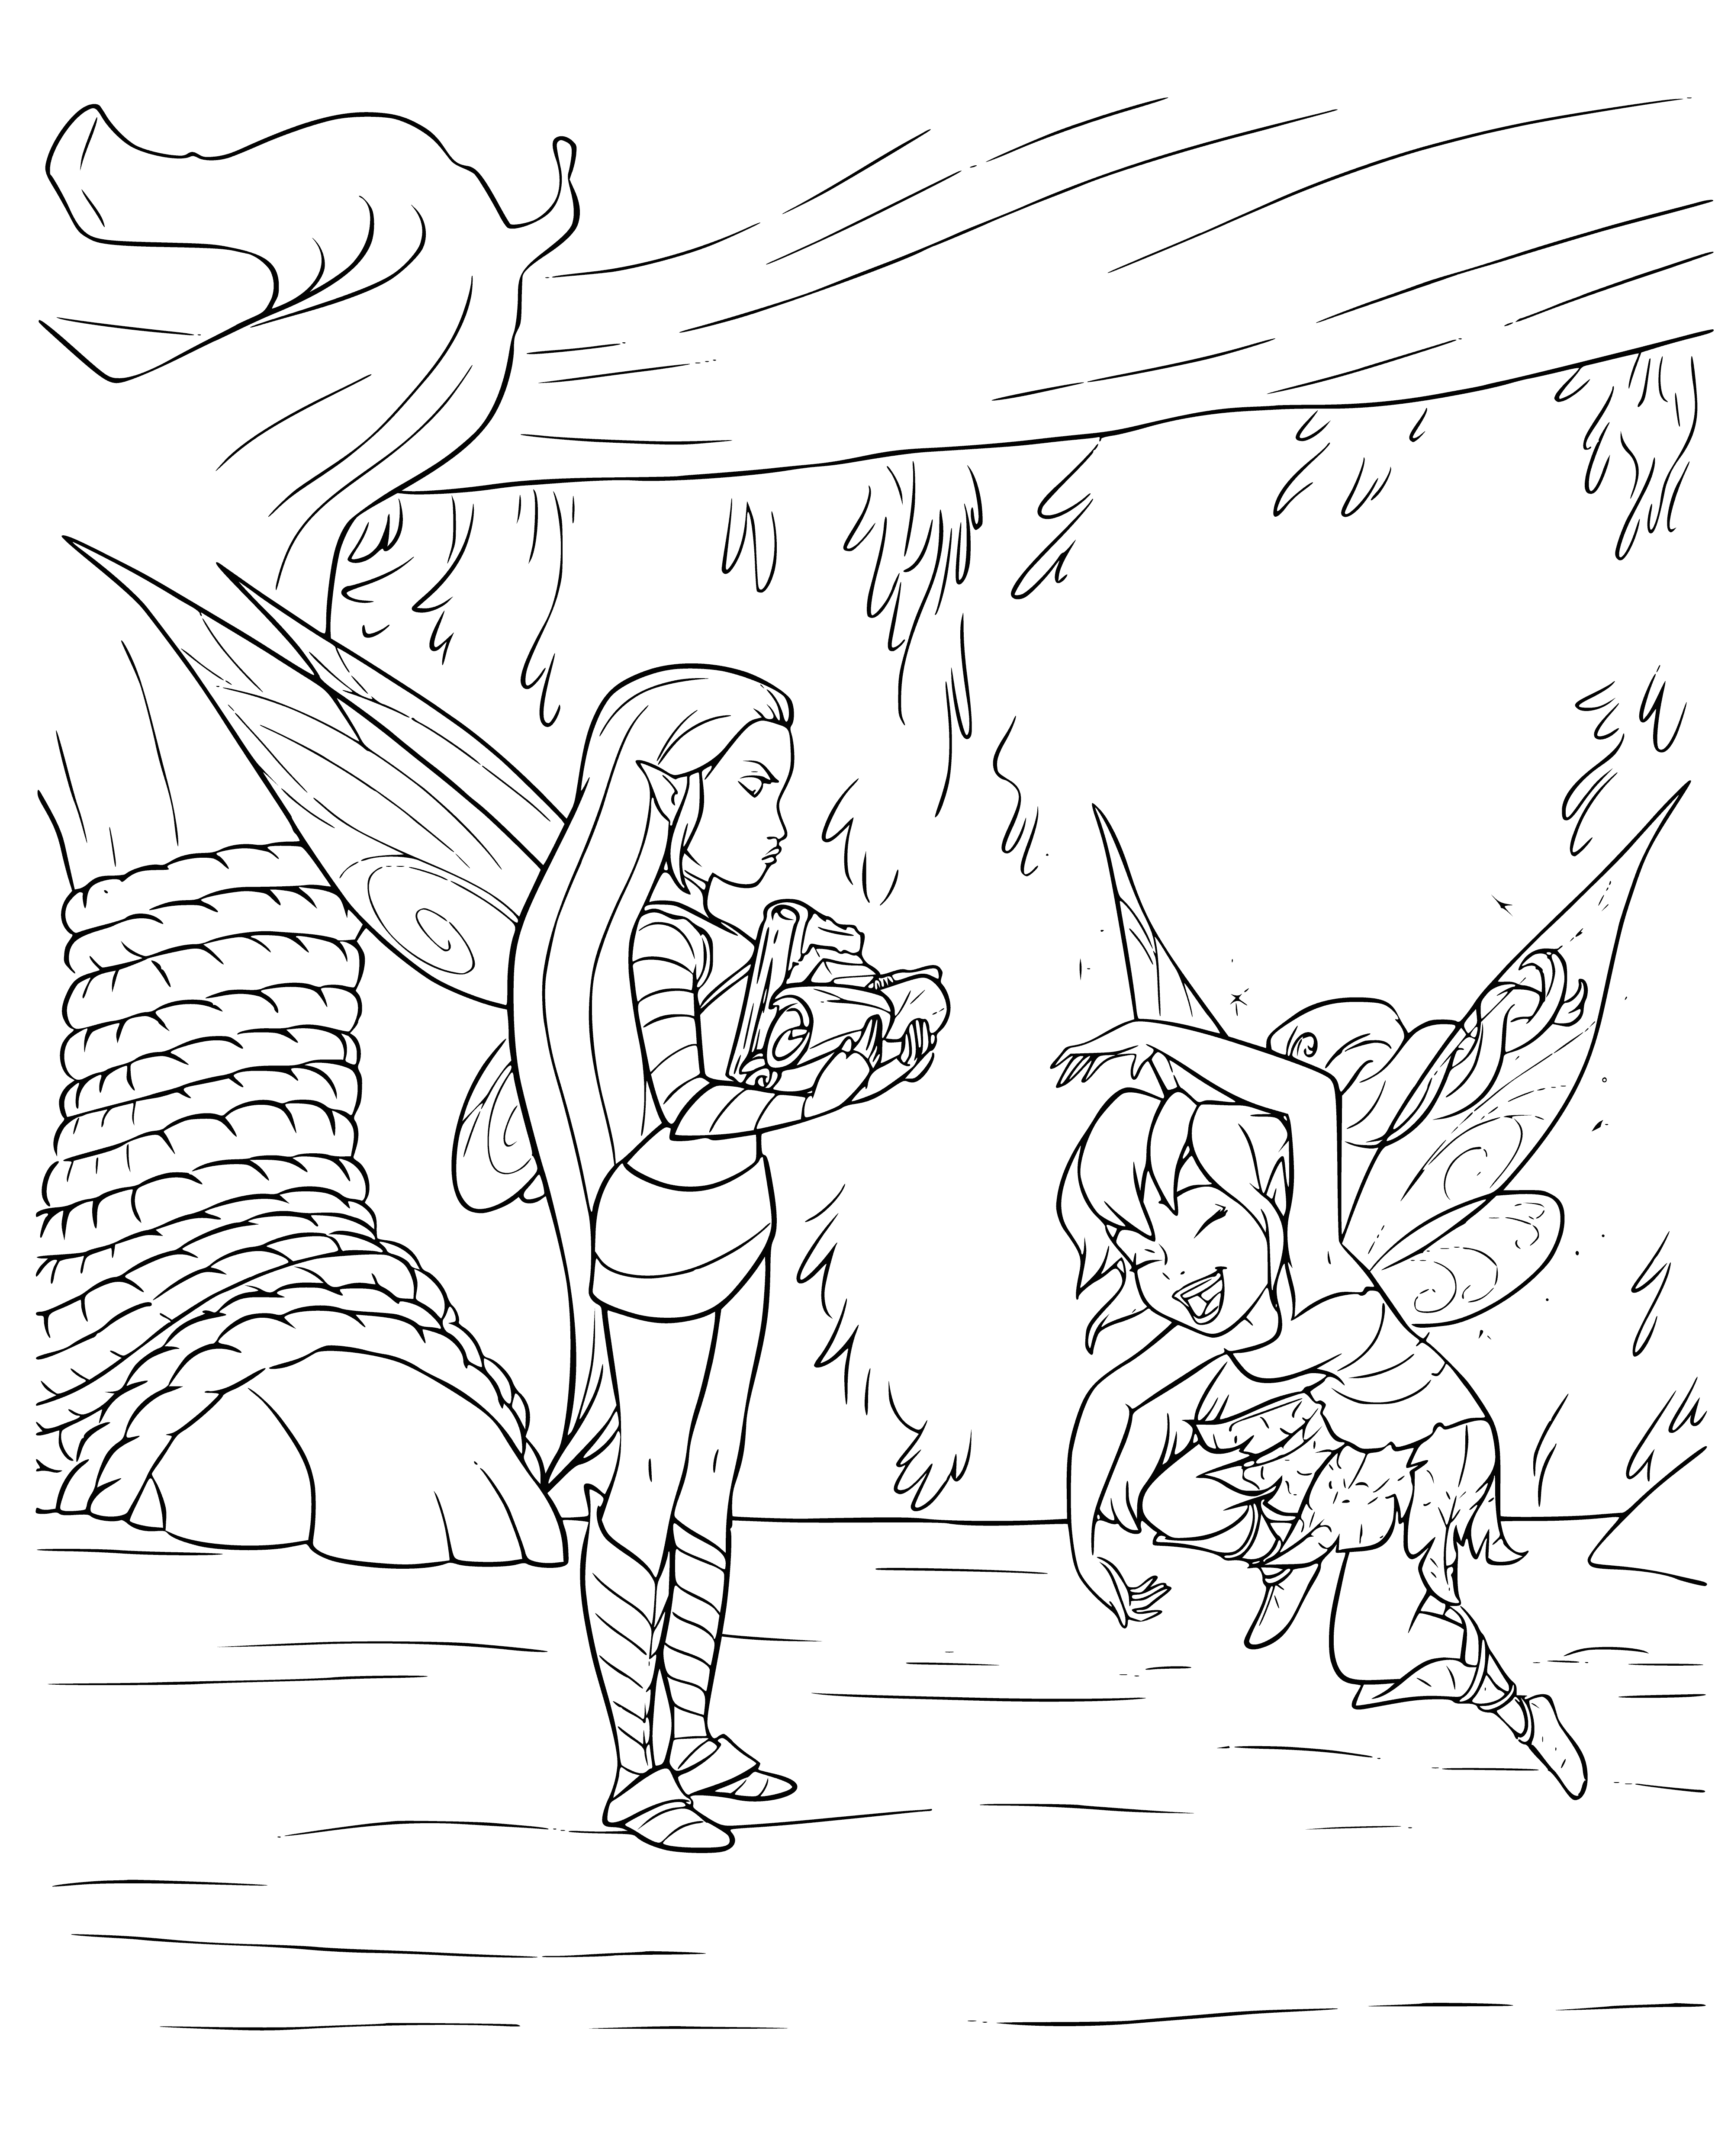 coloring page: Nyx, half-beast/half-human with sword/shield, wings and fur, standing in forest with full moon.